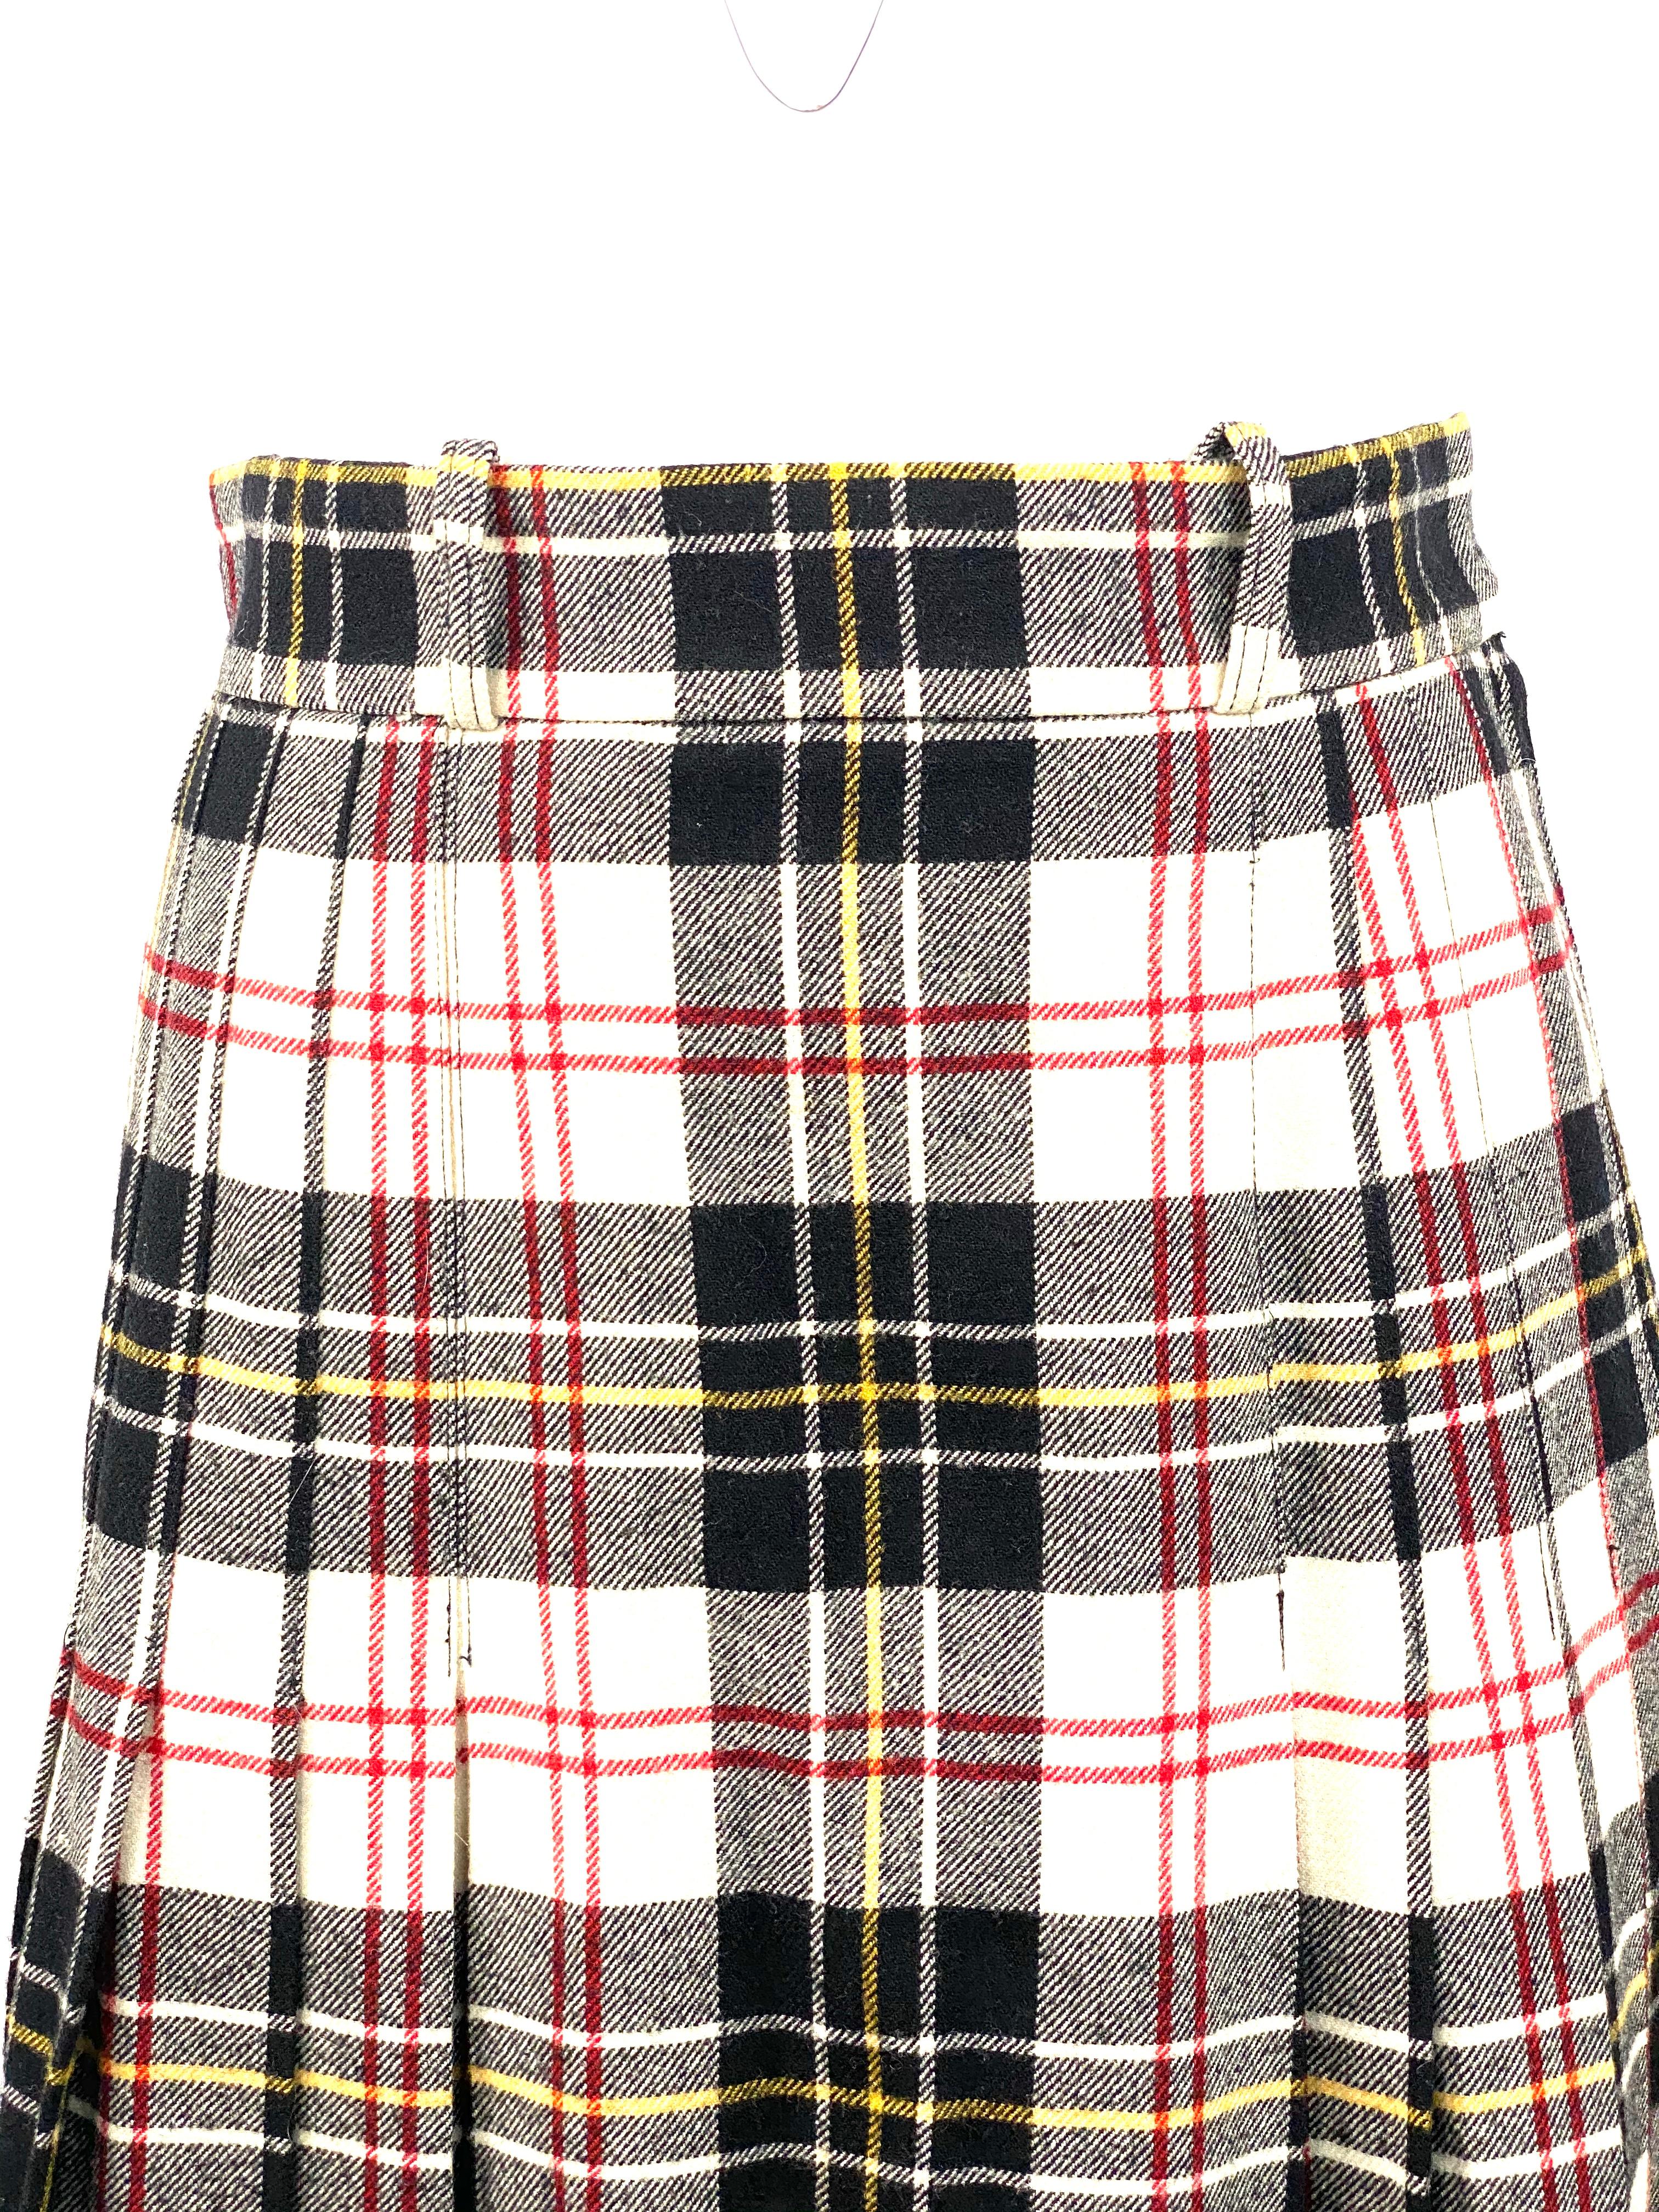 Vintage Valentino Boutique Wool Plaid Flare Midi Skirt Size 8

Product details:
Size 8
Black, white, red and yellow plaid pattern
Size two metal hooks and zipper closure
Featuring loops for belt detail, measure 2